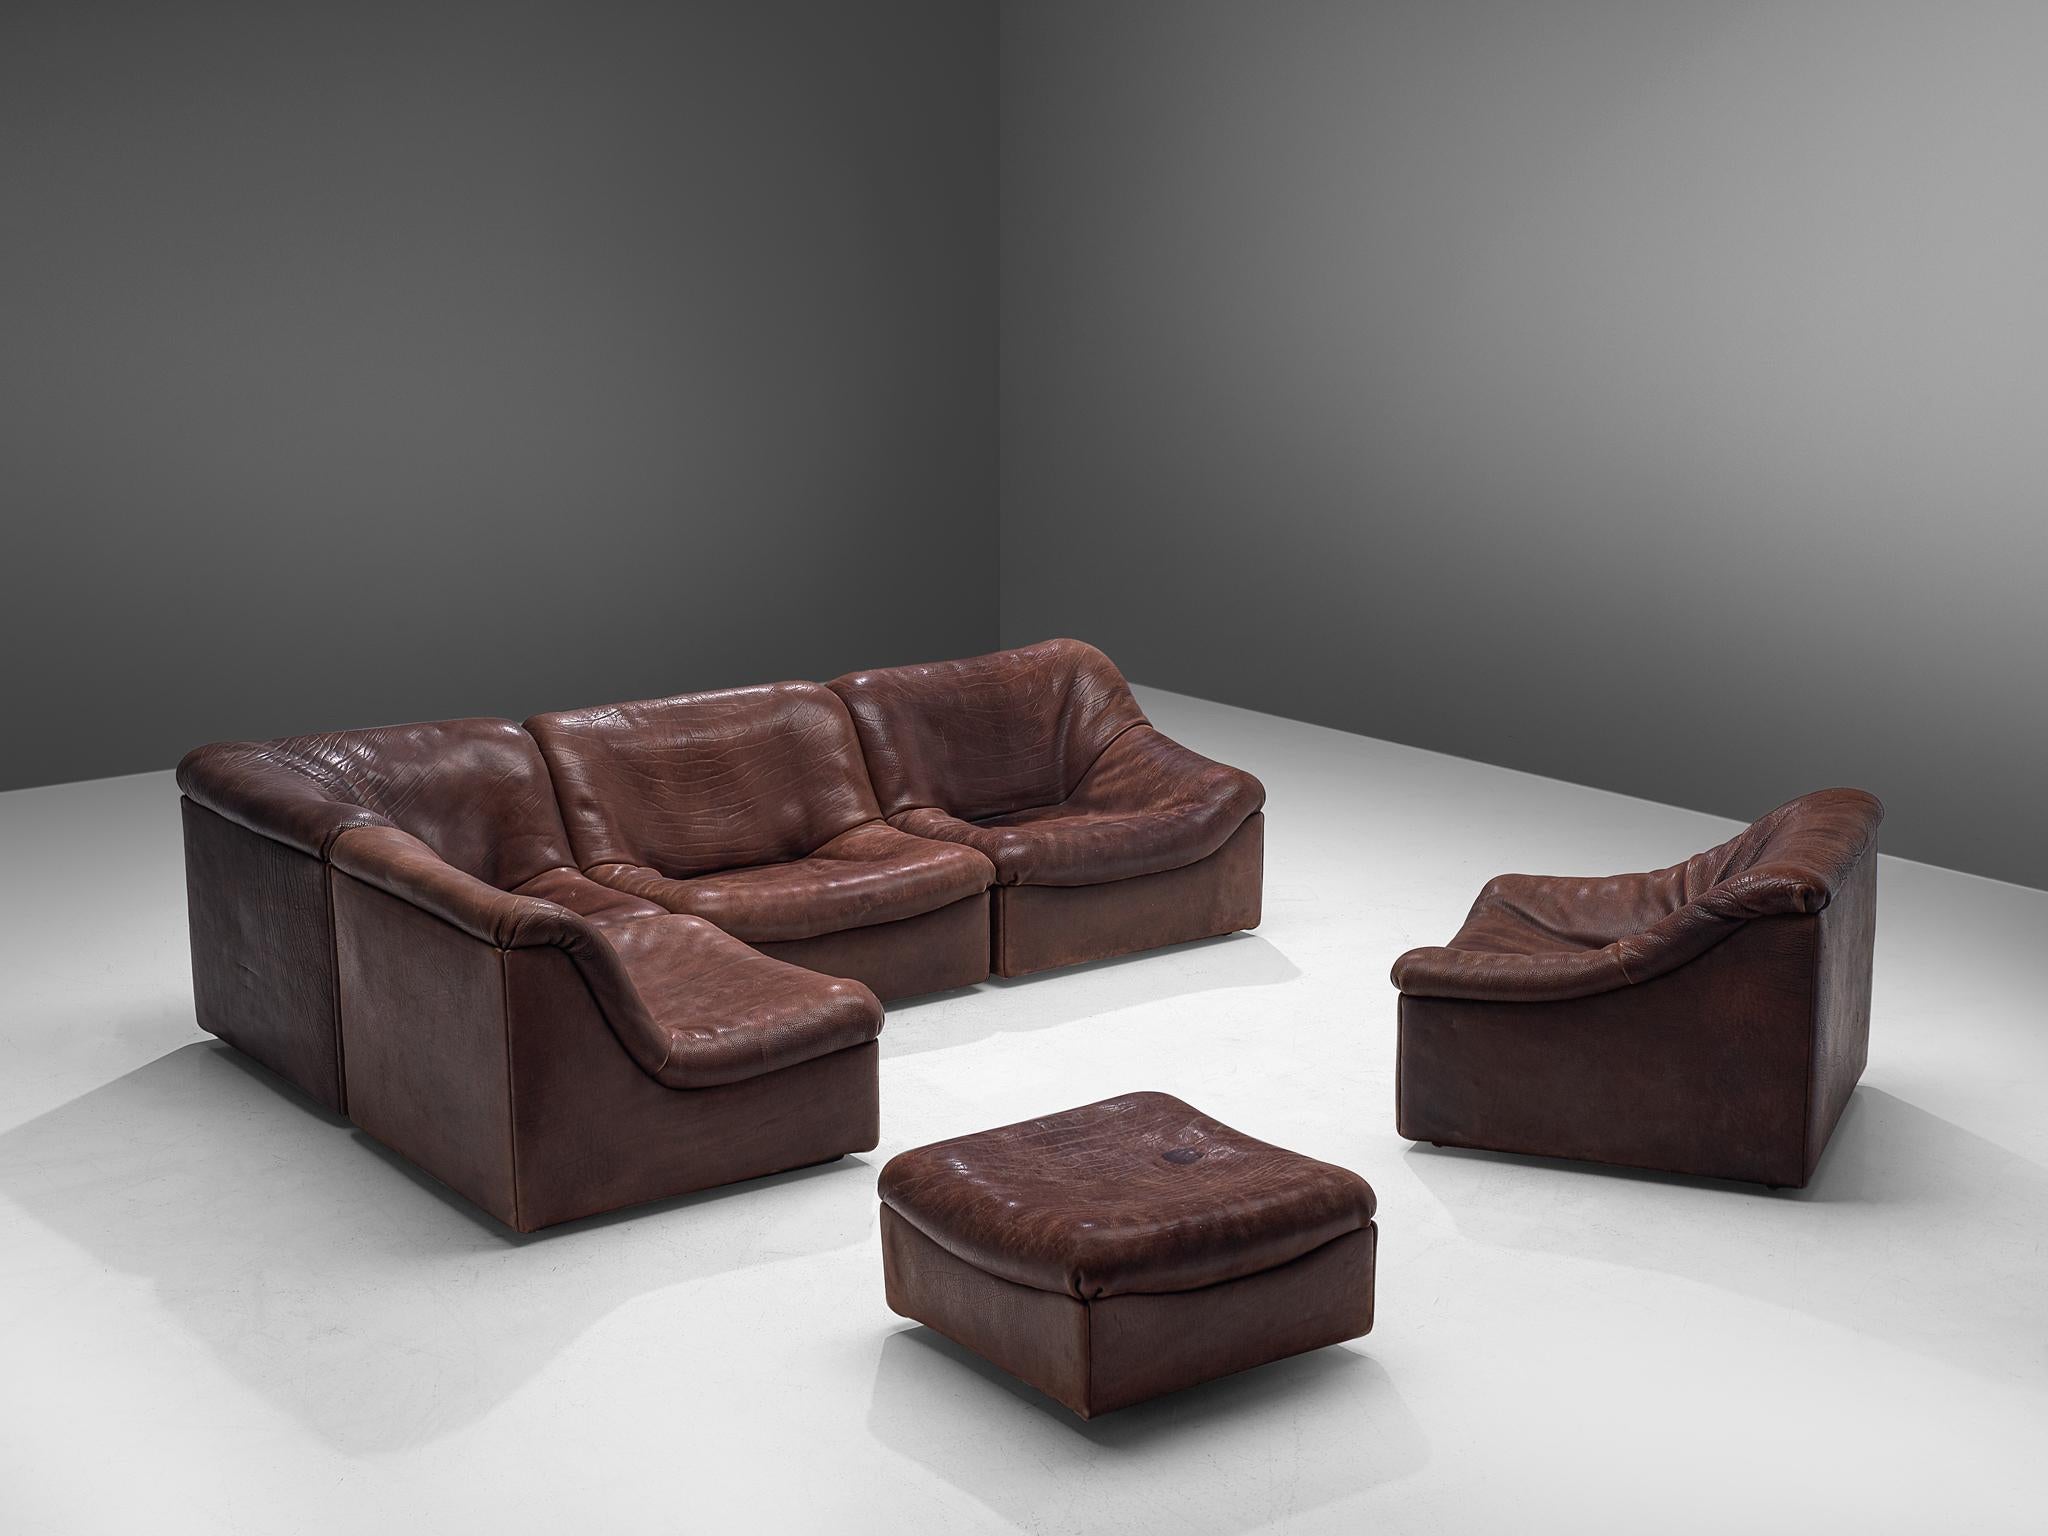 De Sede, DS46 sectional sofa with ottoman, brown buffalo leather, Switzerland, 1970s.

Comfortable six-modular sectional sofa thick buffalo leather by De Sede. Consisting of four regular elements, one corner element and one ottoman this model